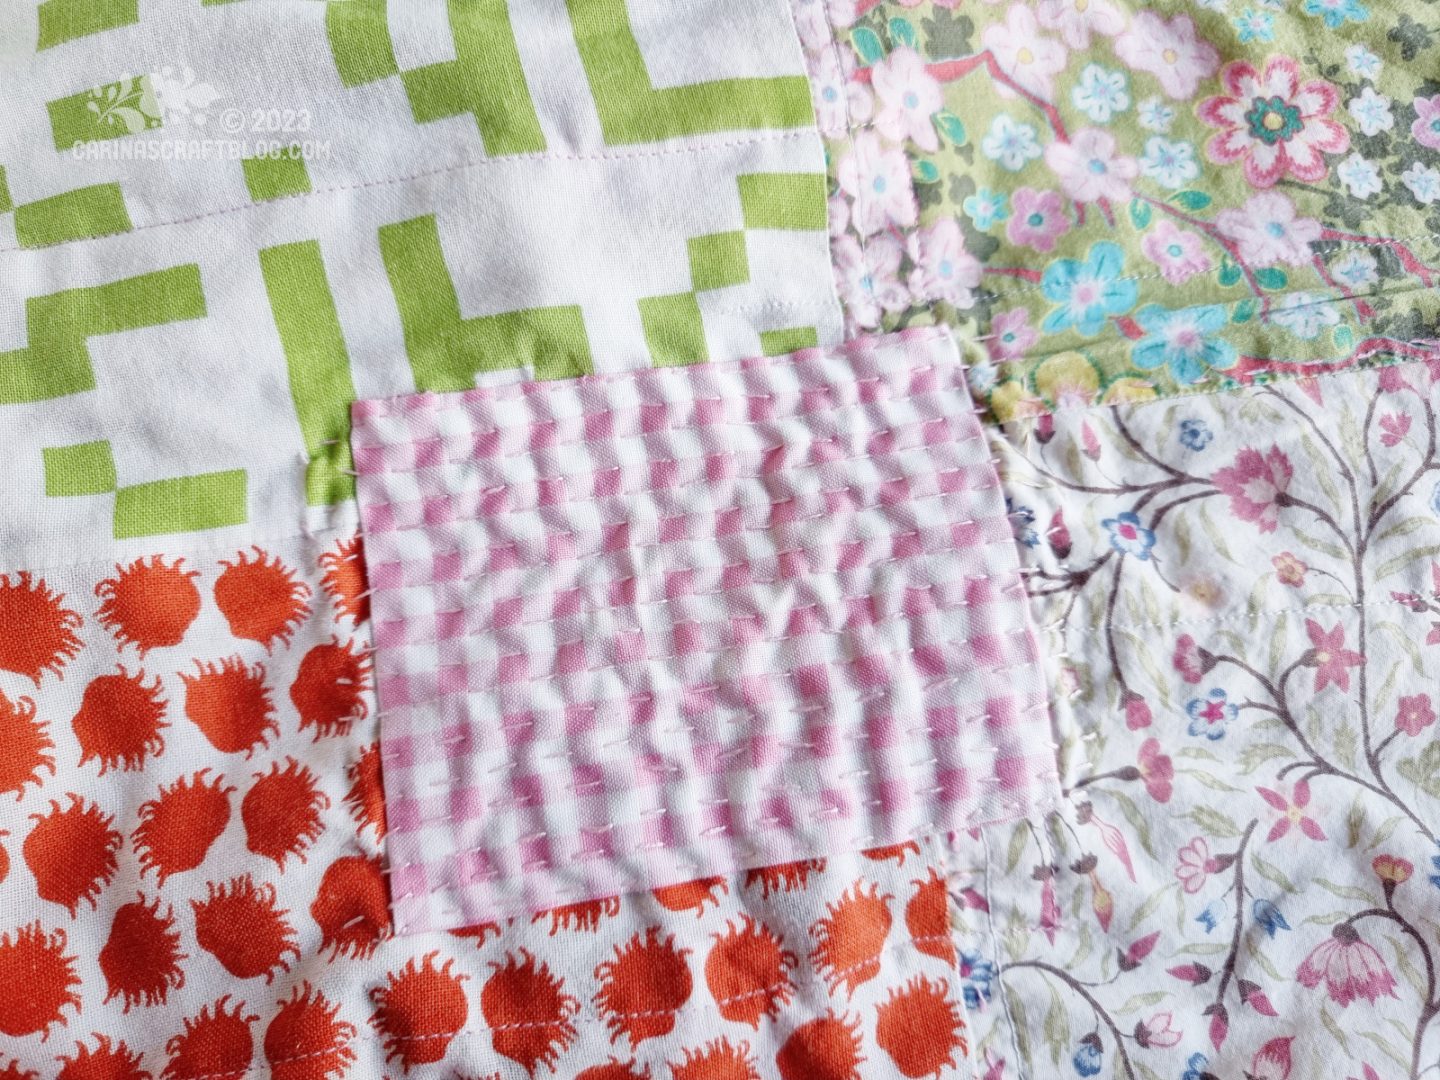 Close view of a mended patch on a patchwork blanket. The patch is pink and white checks with pink stitching across.